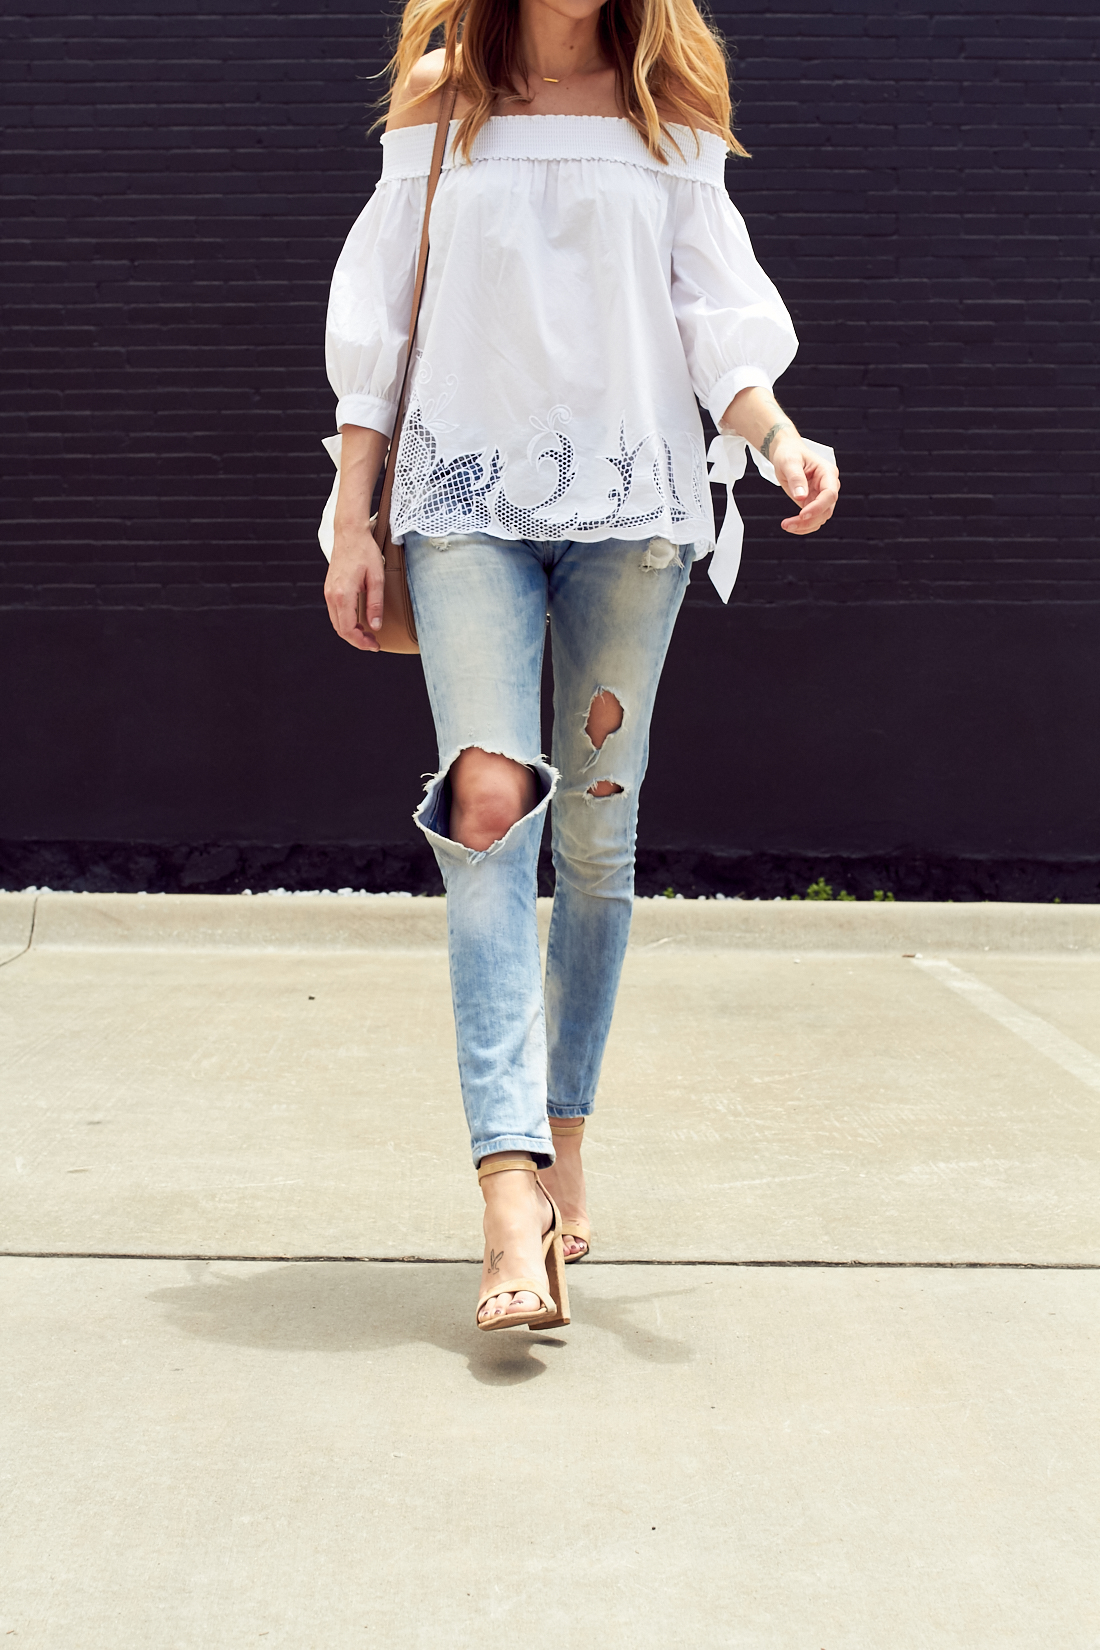 fashion-jackson-chelsea28-white-off-the-shoulder-cutout-top-denim-ripped-jeans